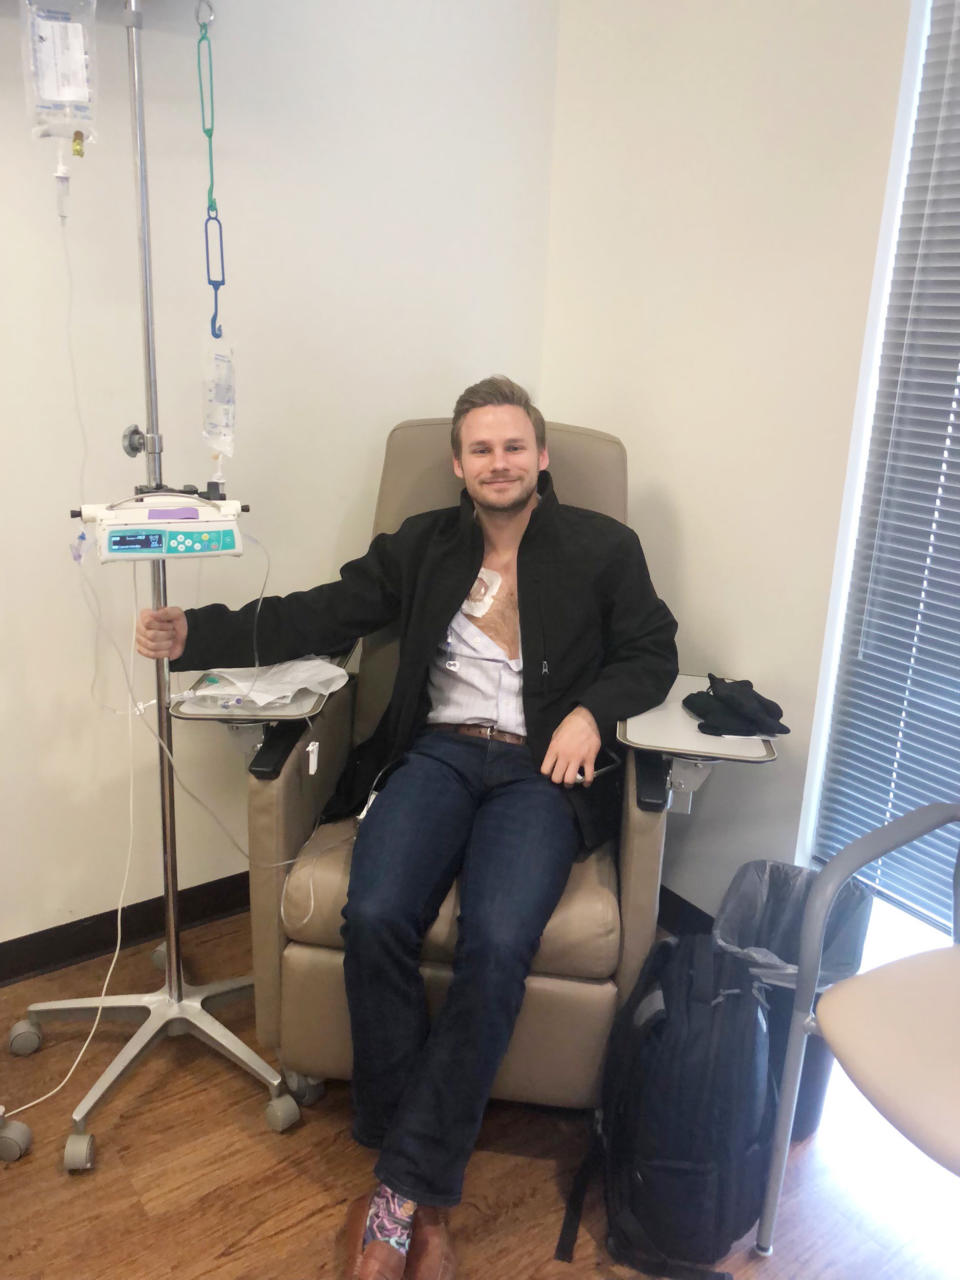 Treatment for cancer is grueling, but Evan White stays positive, appreciates life more and wants to raise awareness of the cancer for others.  (Courtesy Evan White)